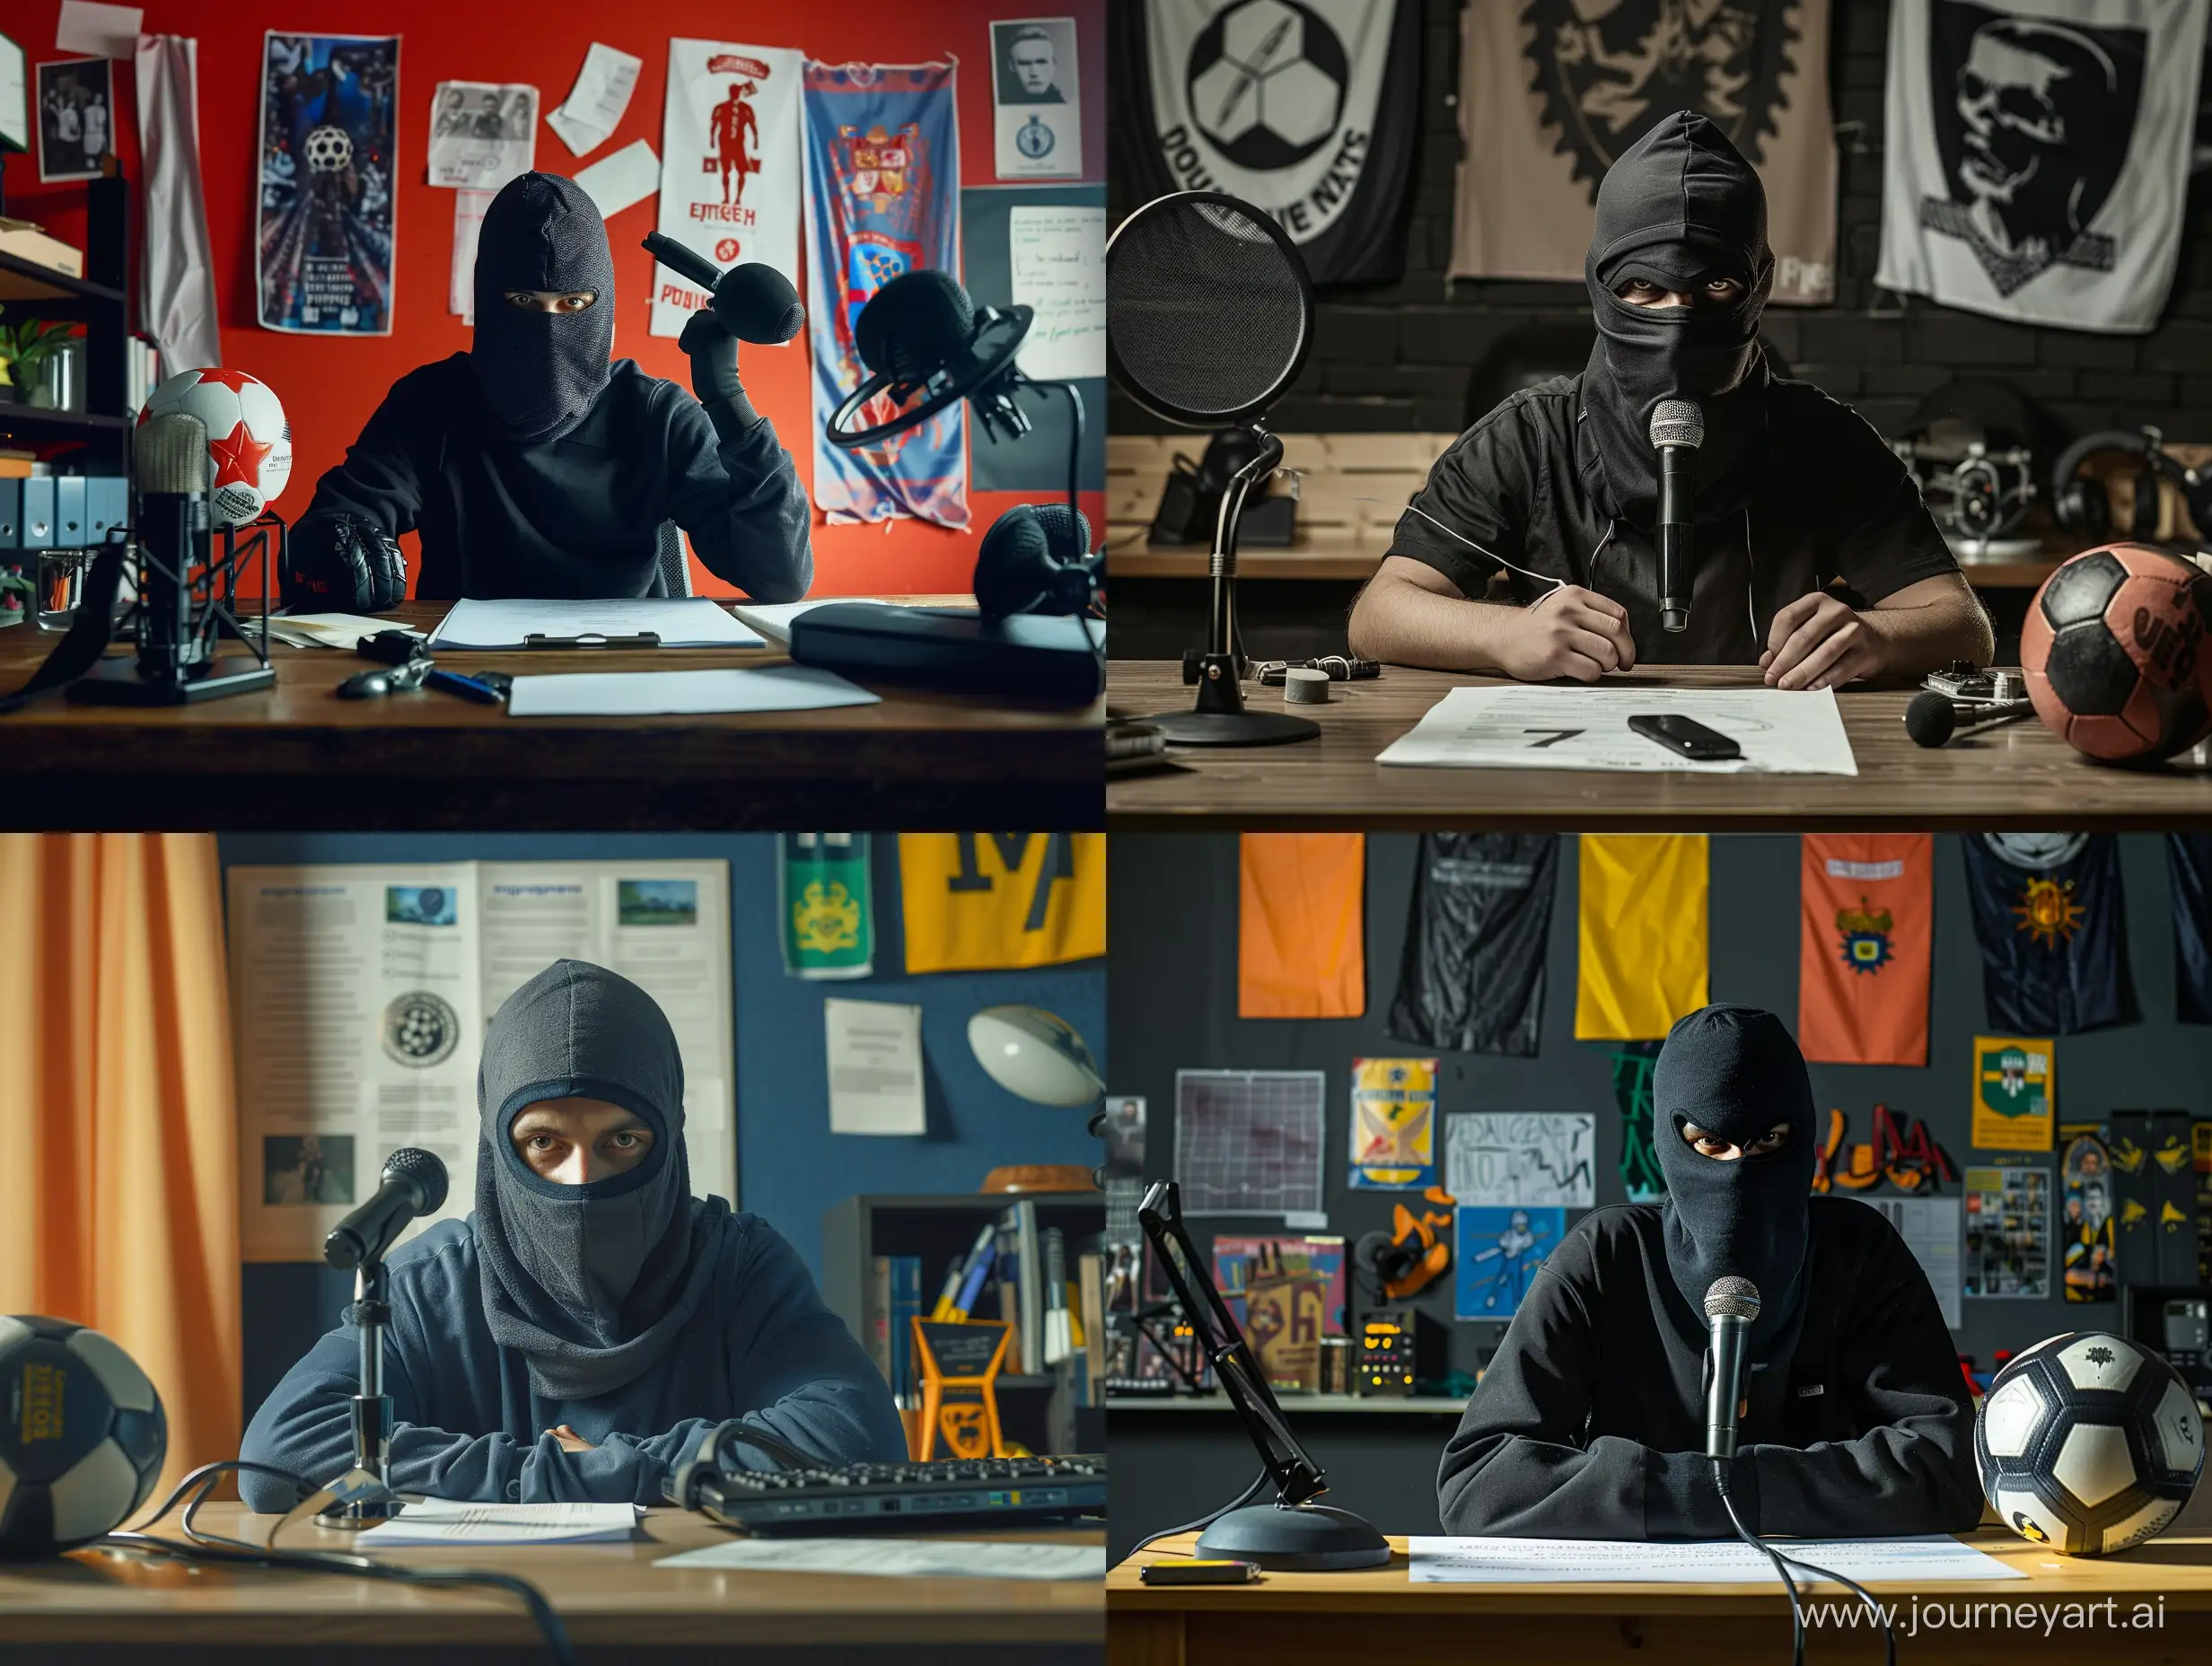 membre ultras with balaclava set in the desk with ball of football  and baners paper and microphone 

